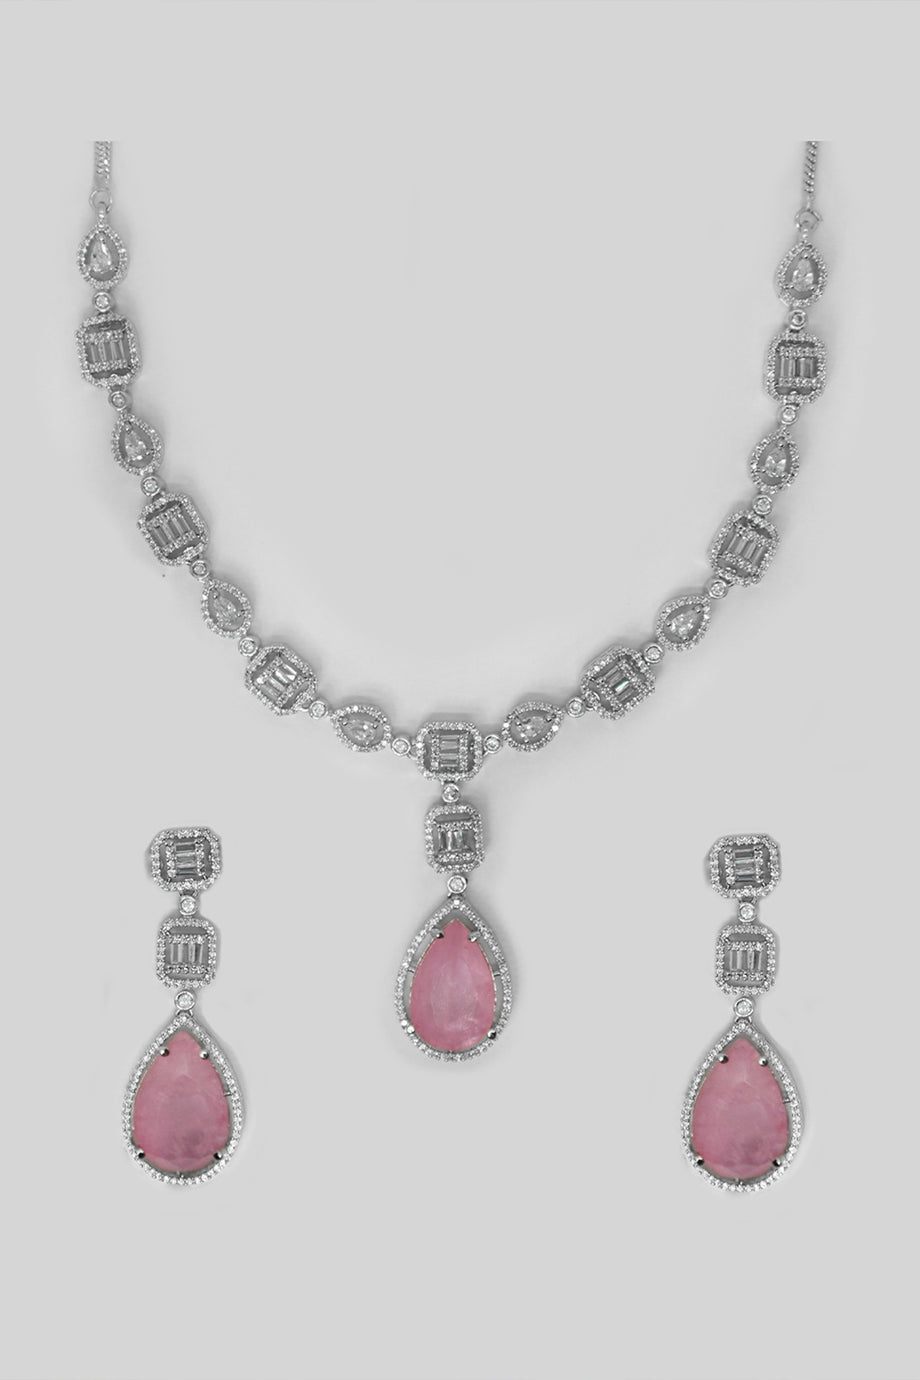 Pink American Dimond Necklace Set by Niscka-Necklace For Women